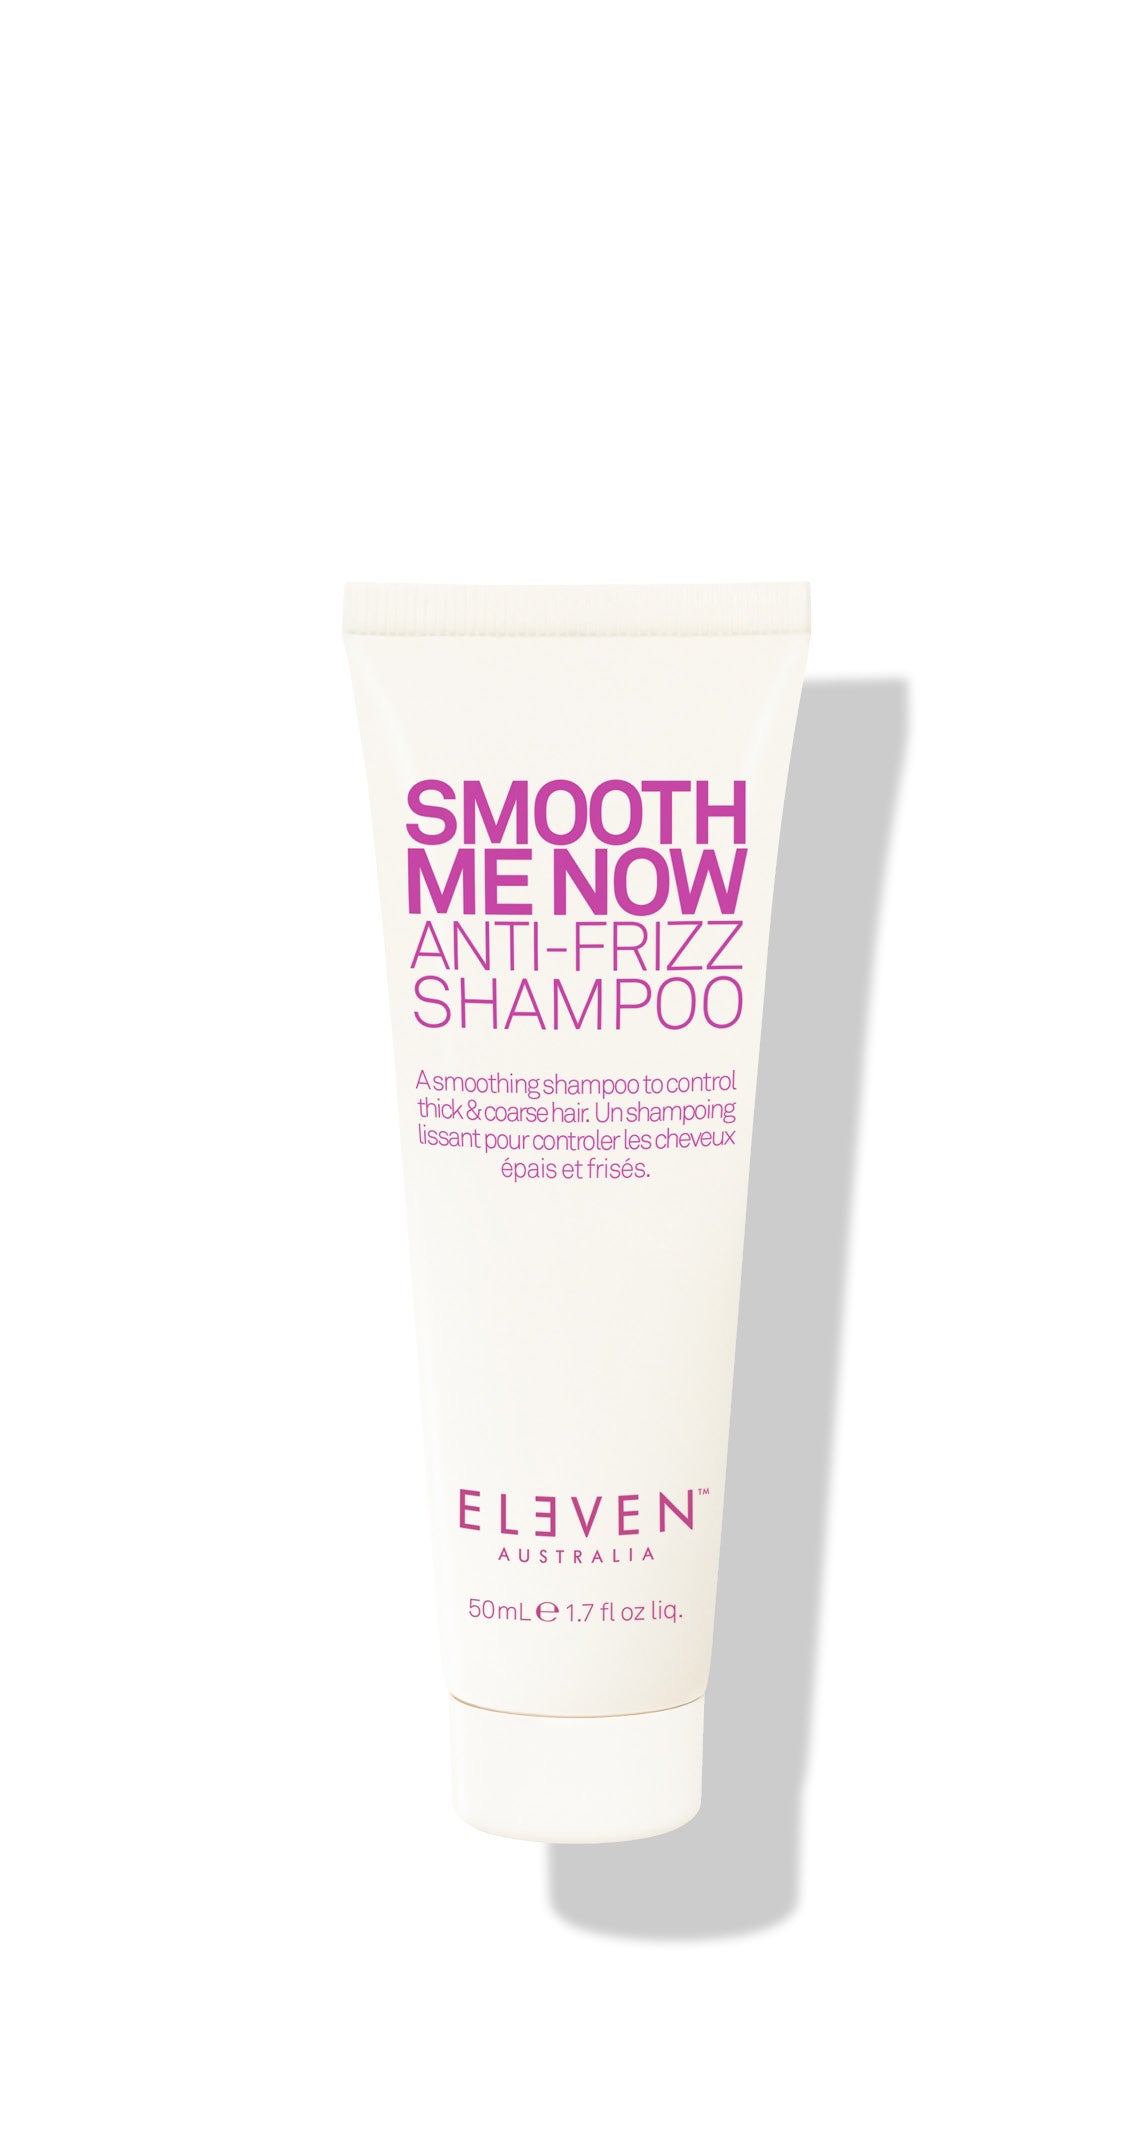 ELEVEN Hair SMOOTH ME NOW ANTI-FRIZZ SHAMPOO fights the two main causes of frizz – damage and dryness. The formula strengthens the hair shaft with protein while helping hair retain moisture. Thick and coarse or dry and frail, this shampoo is the ultimate frizz fighter! travel size